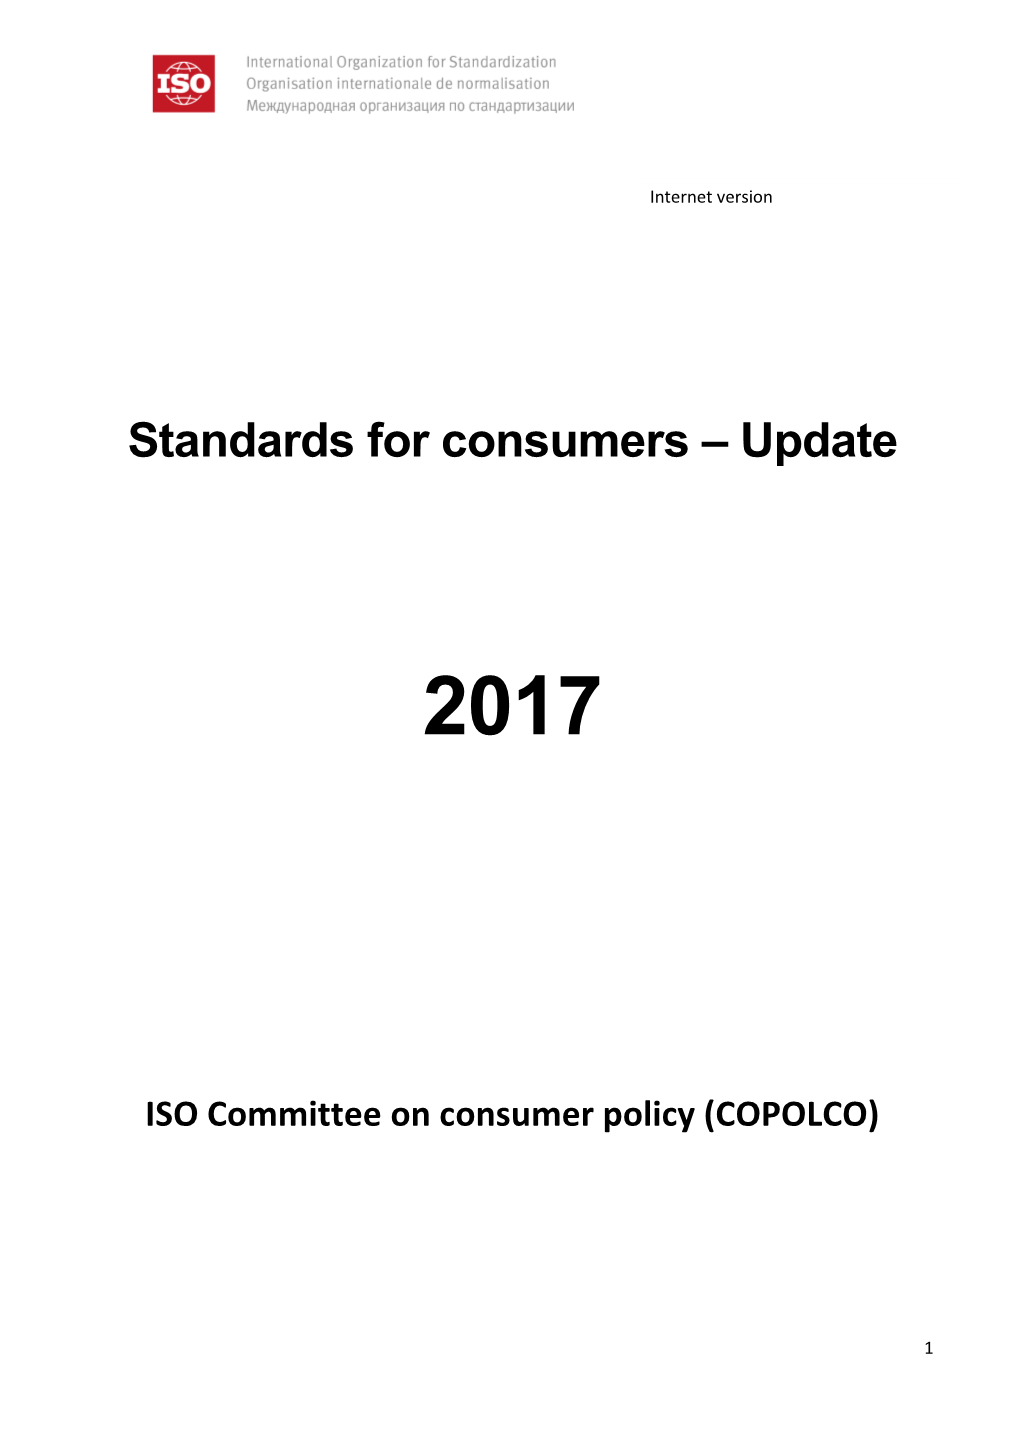 Standards for Consumers – Update